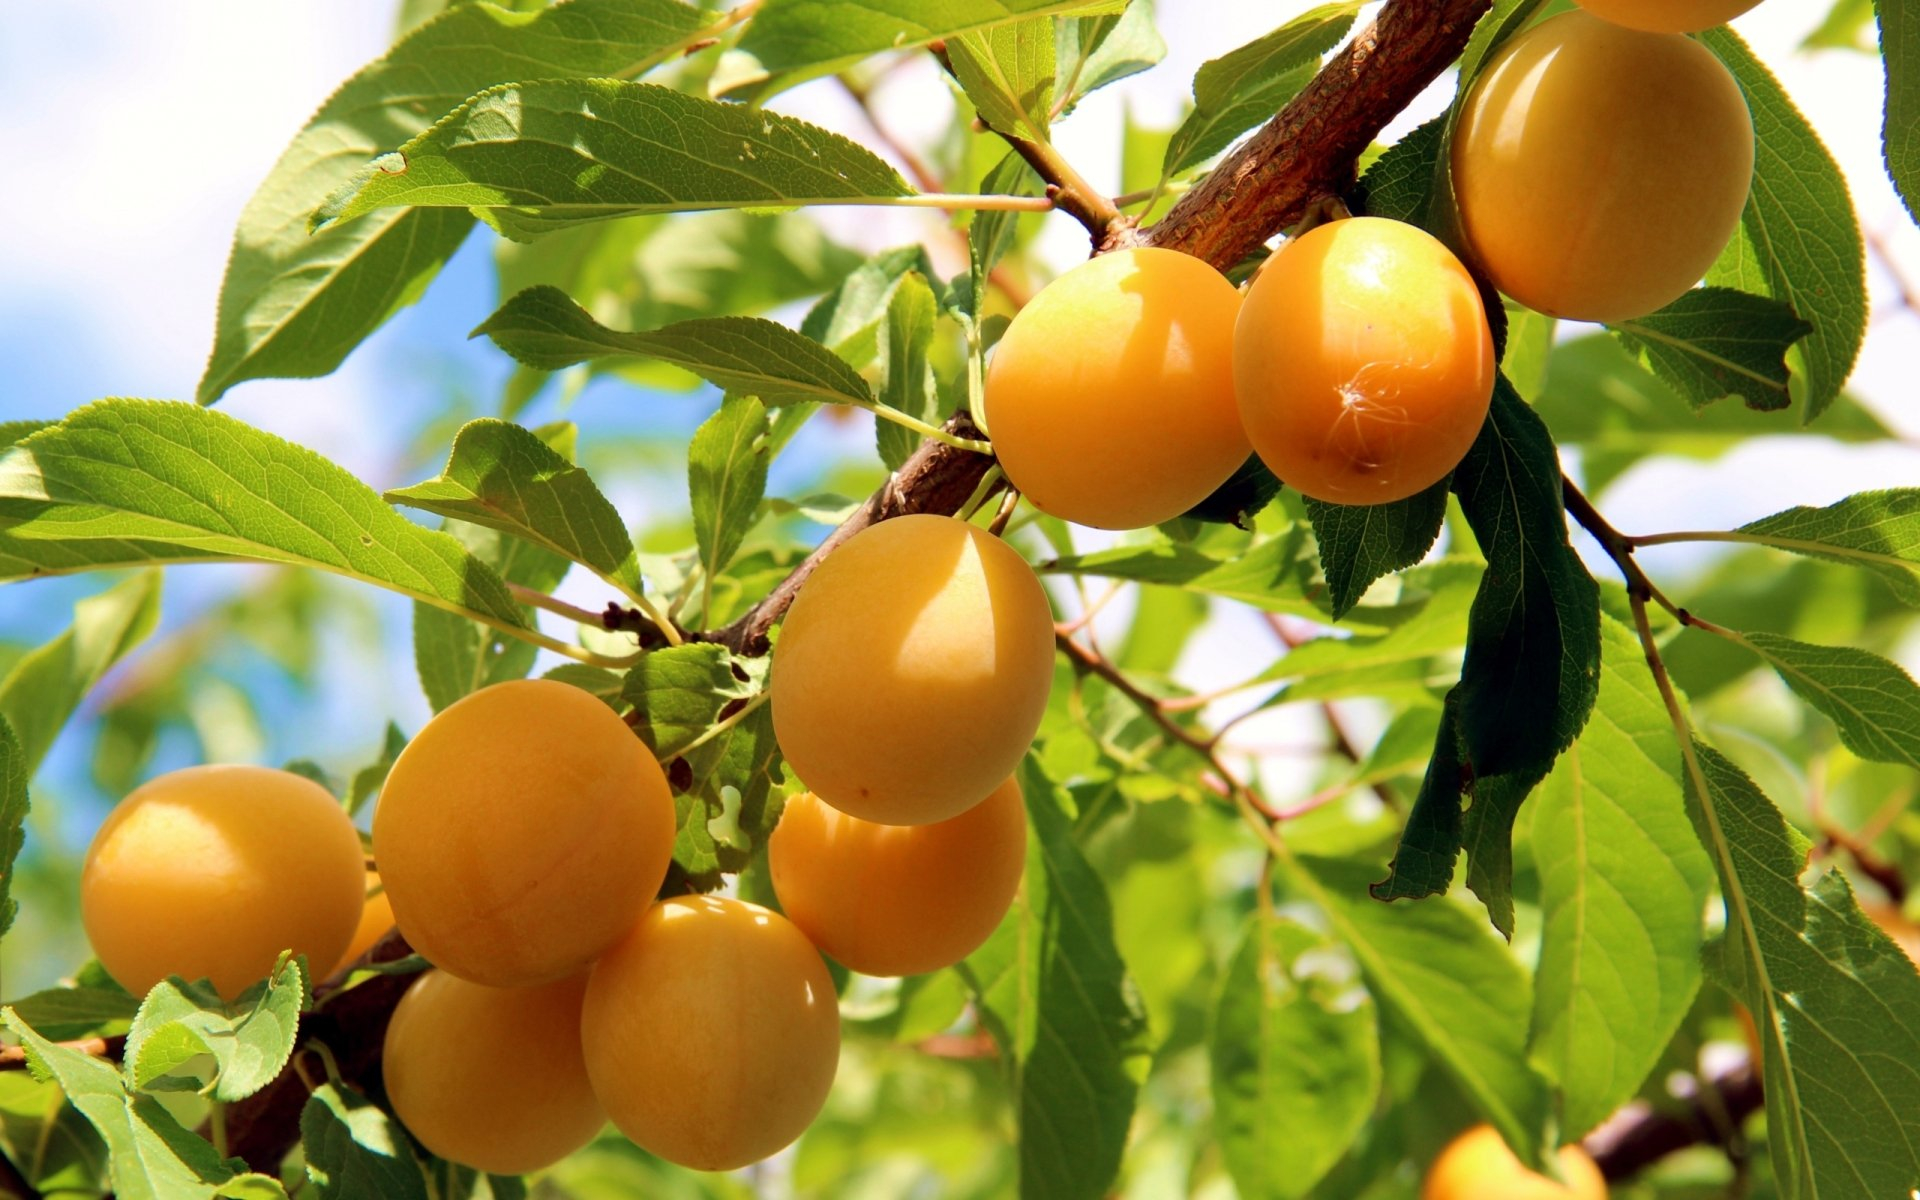 Juicy and ripe peaches on a tree branch